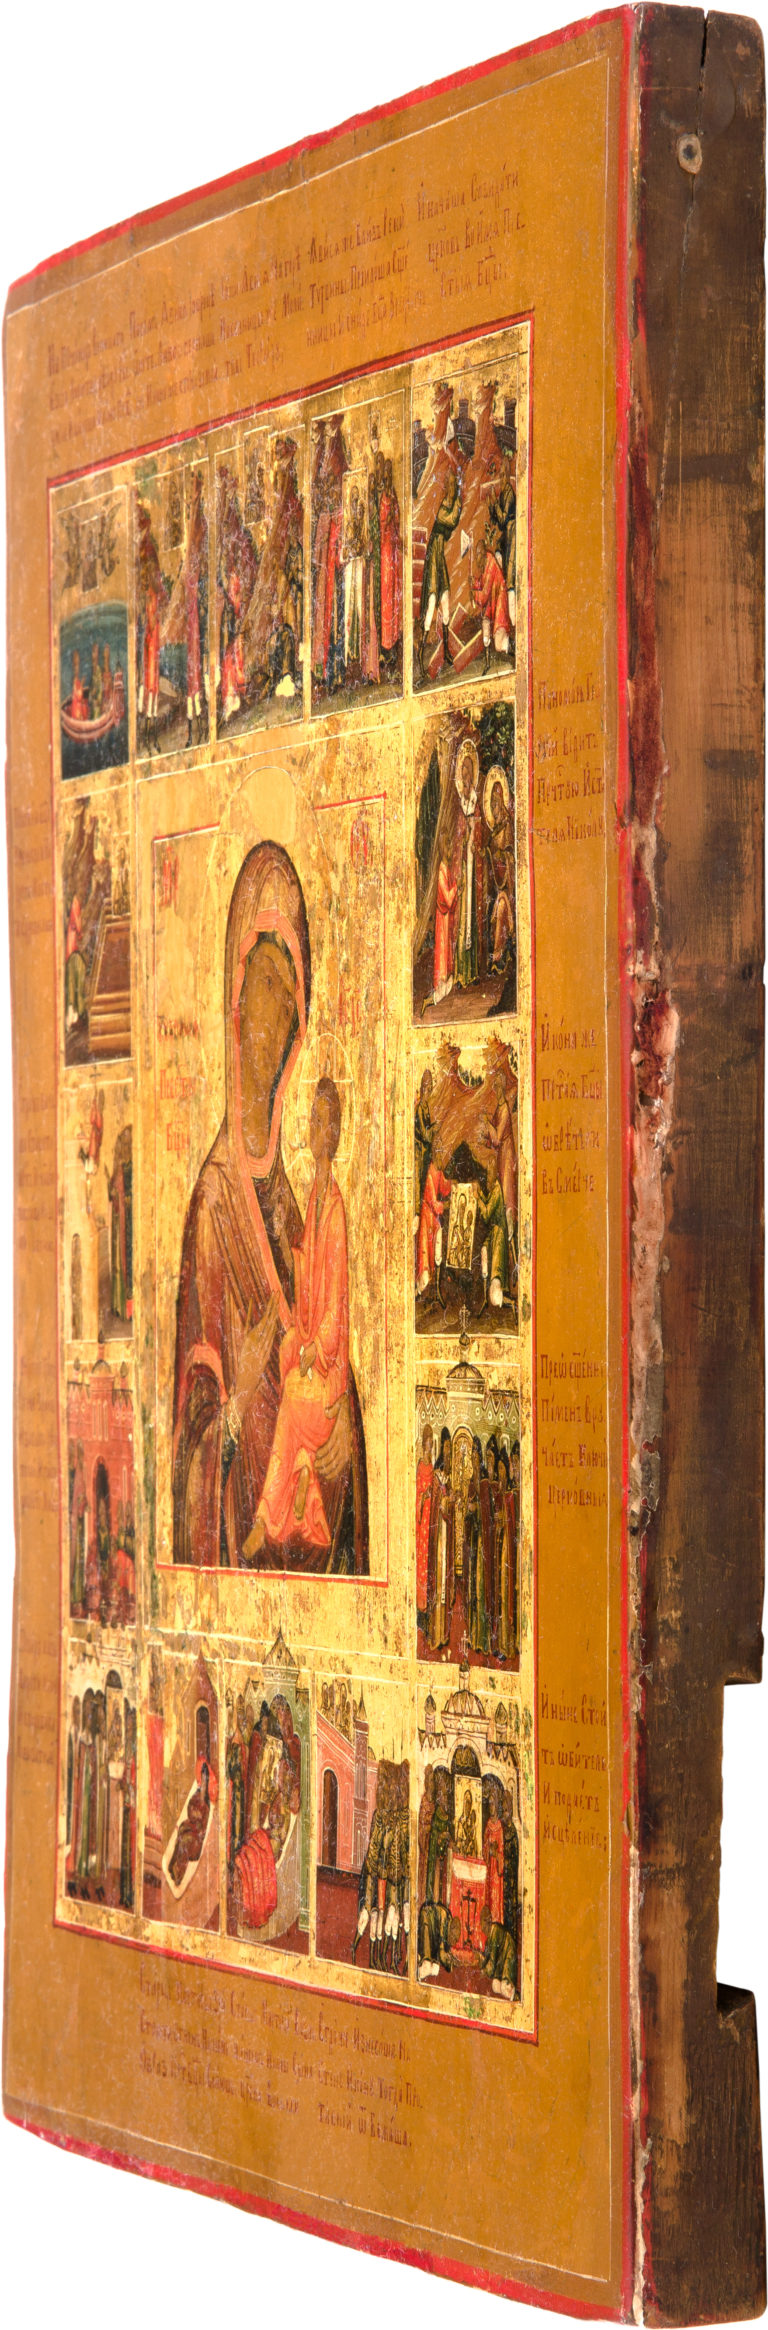 The Tikhvin Mother Of God, With The Legend Of The Icon In 16 Border Scenes